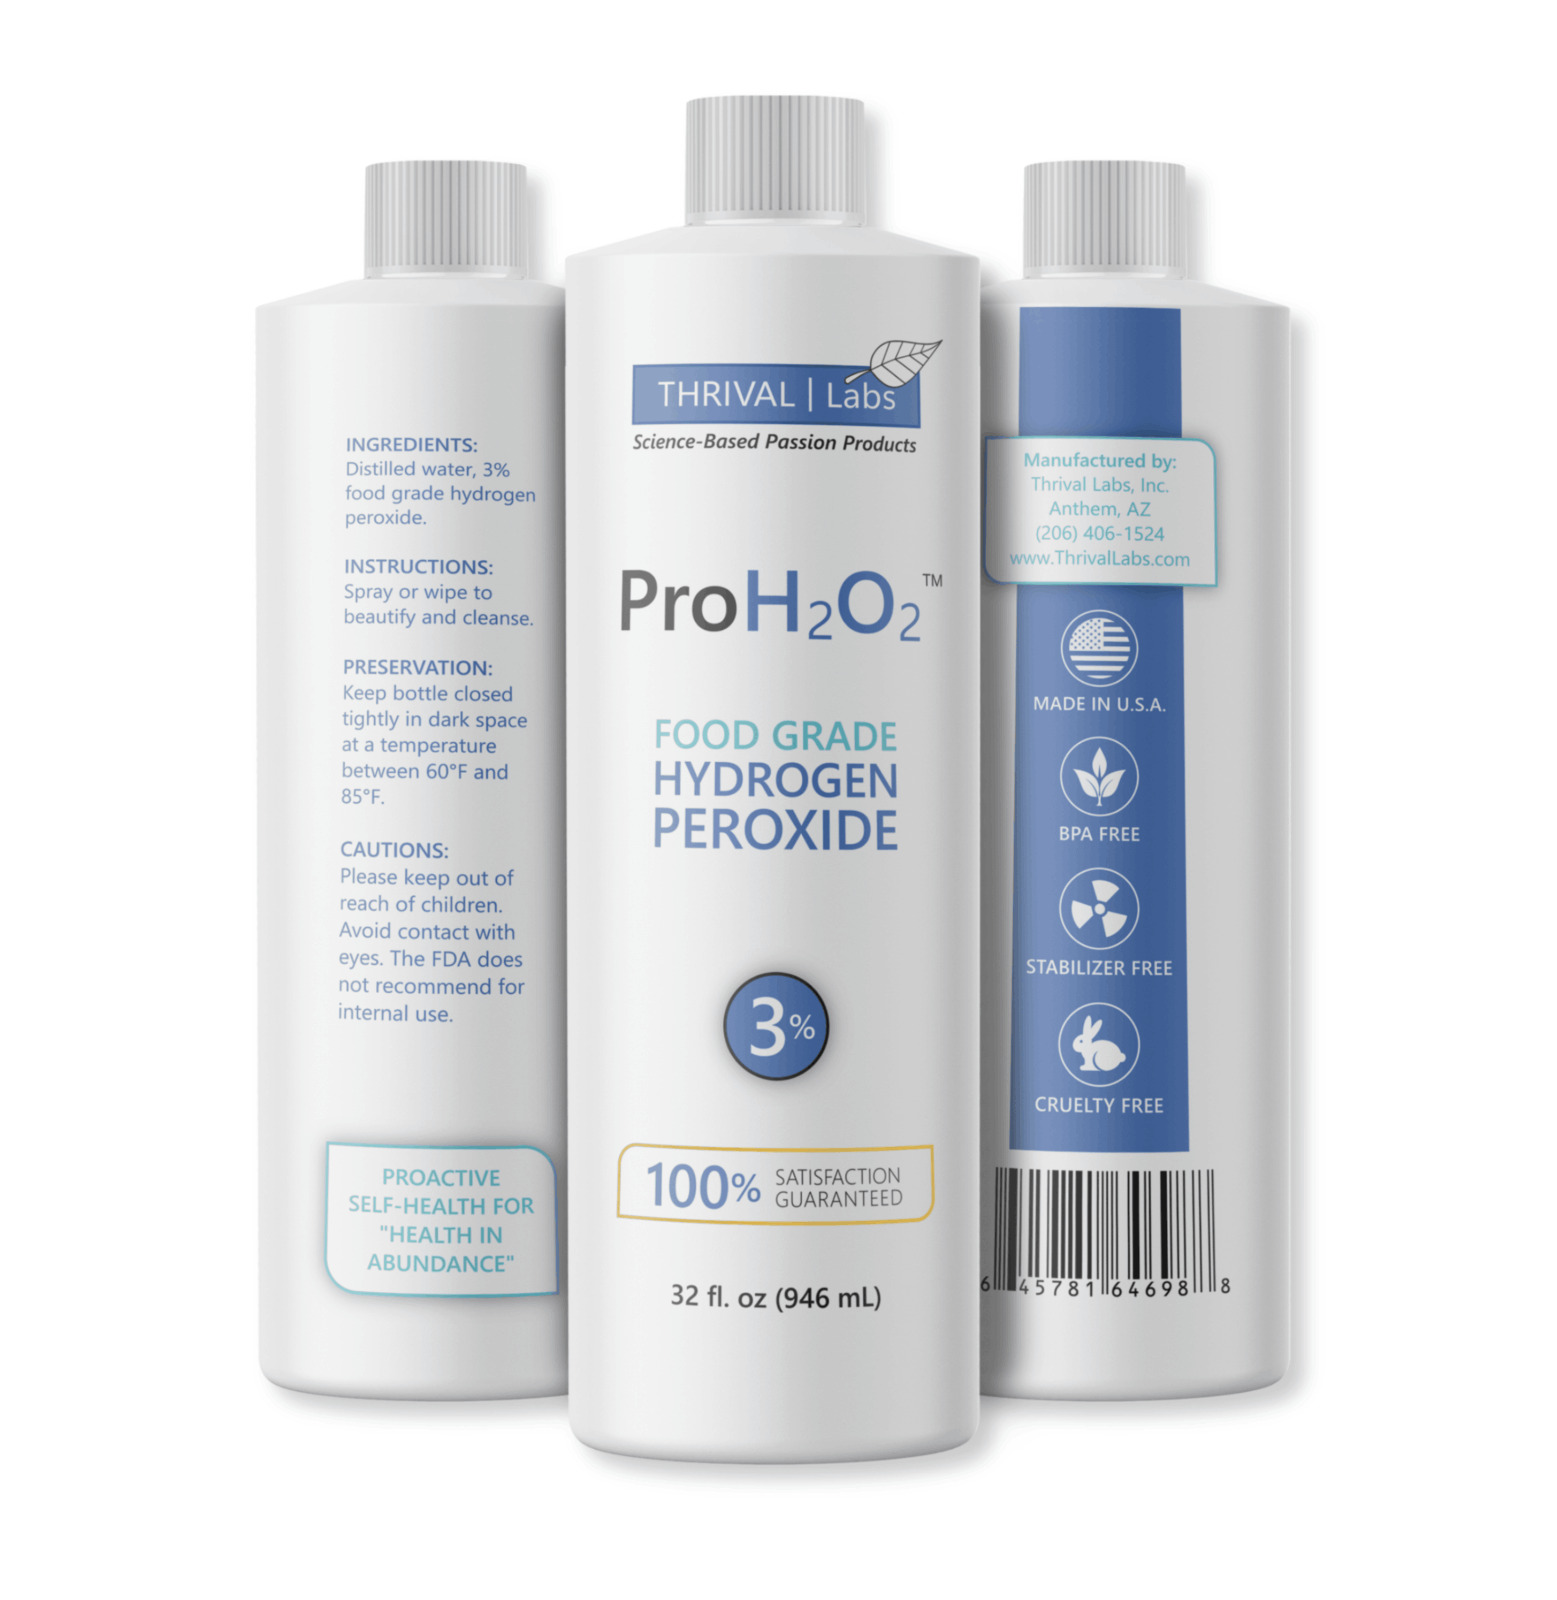 ProH2O2 Food Grade Hydrogen Peroxide 3%, 32oz Refill Bottle by Thrival Labs